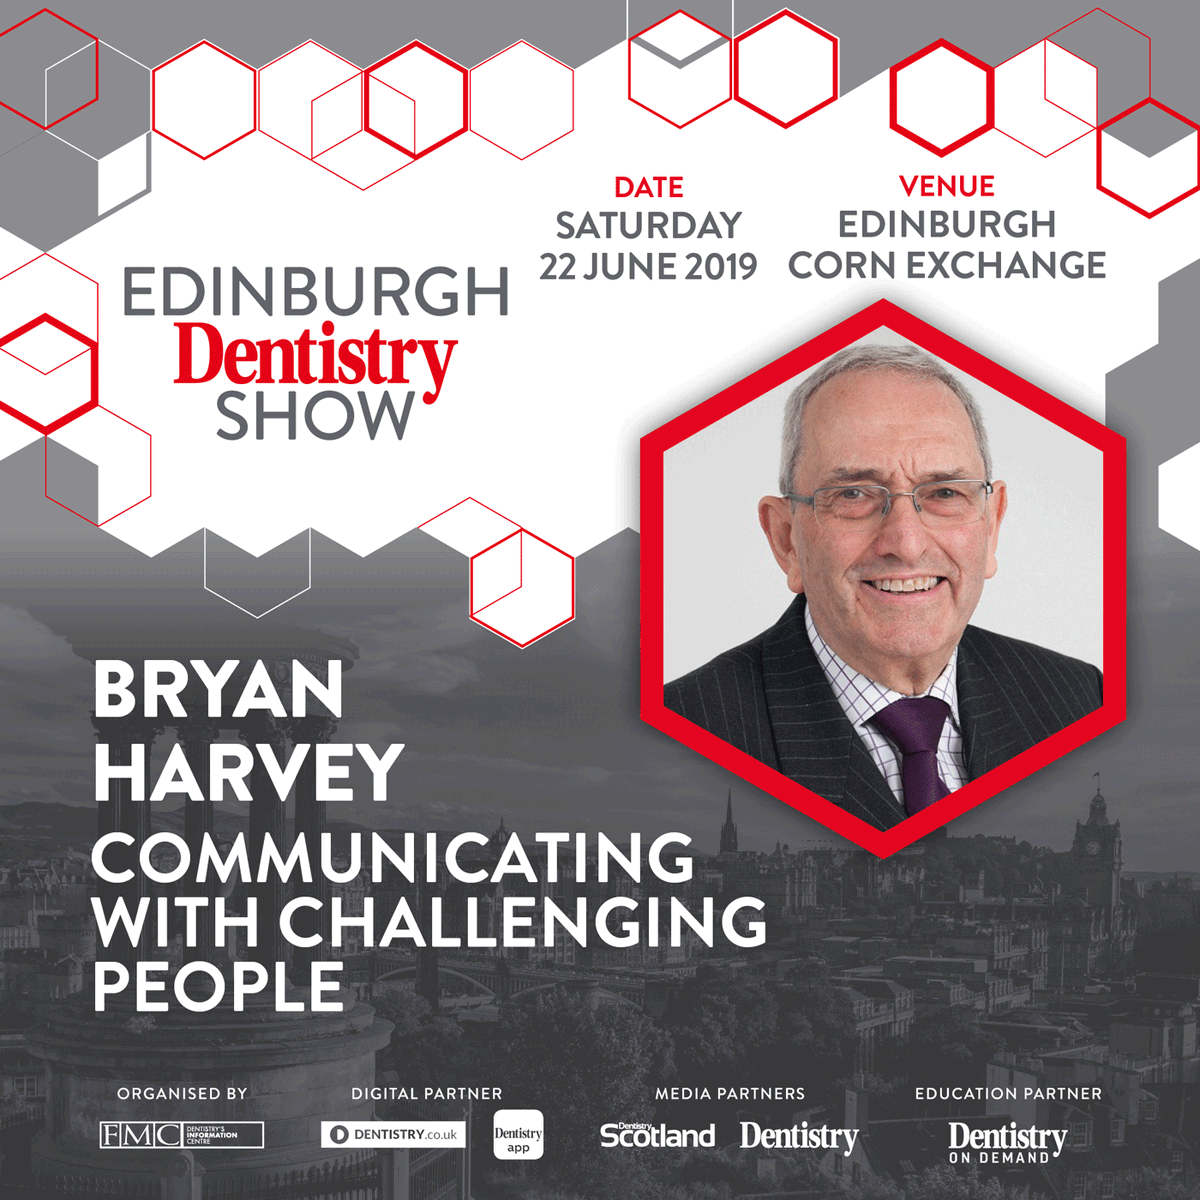 Bryan Harvey will provide insight on communicating with challenging people at the unmissable Edinburgh Dentistry Show on 22 June! Get your free ticket now! 
👉 bit.ly/2VIL6PF 👈  

#edinburghdentistryshow #dentist #dentistry #dentistrylove #dentistedinburgh